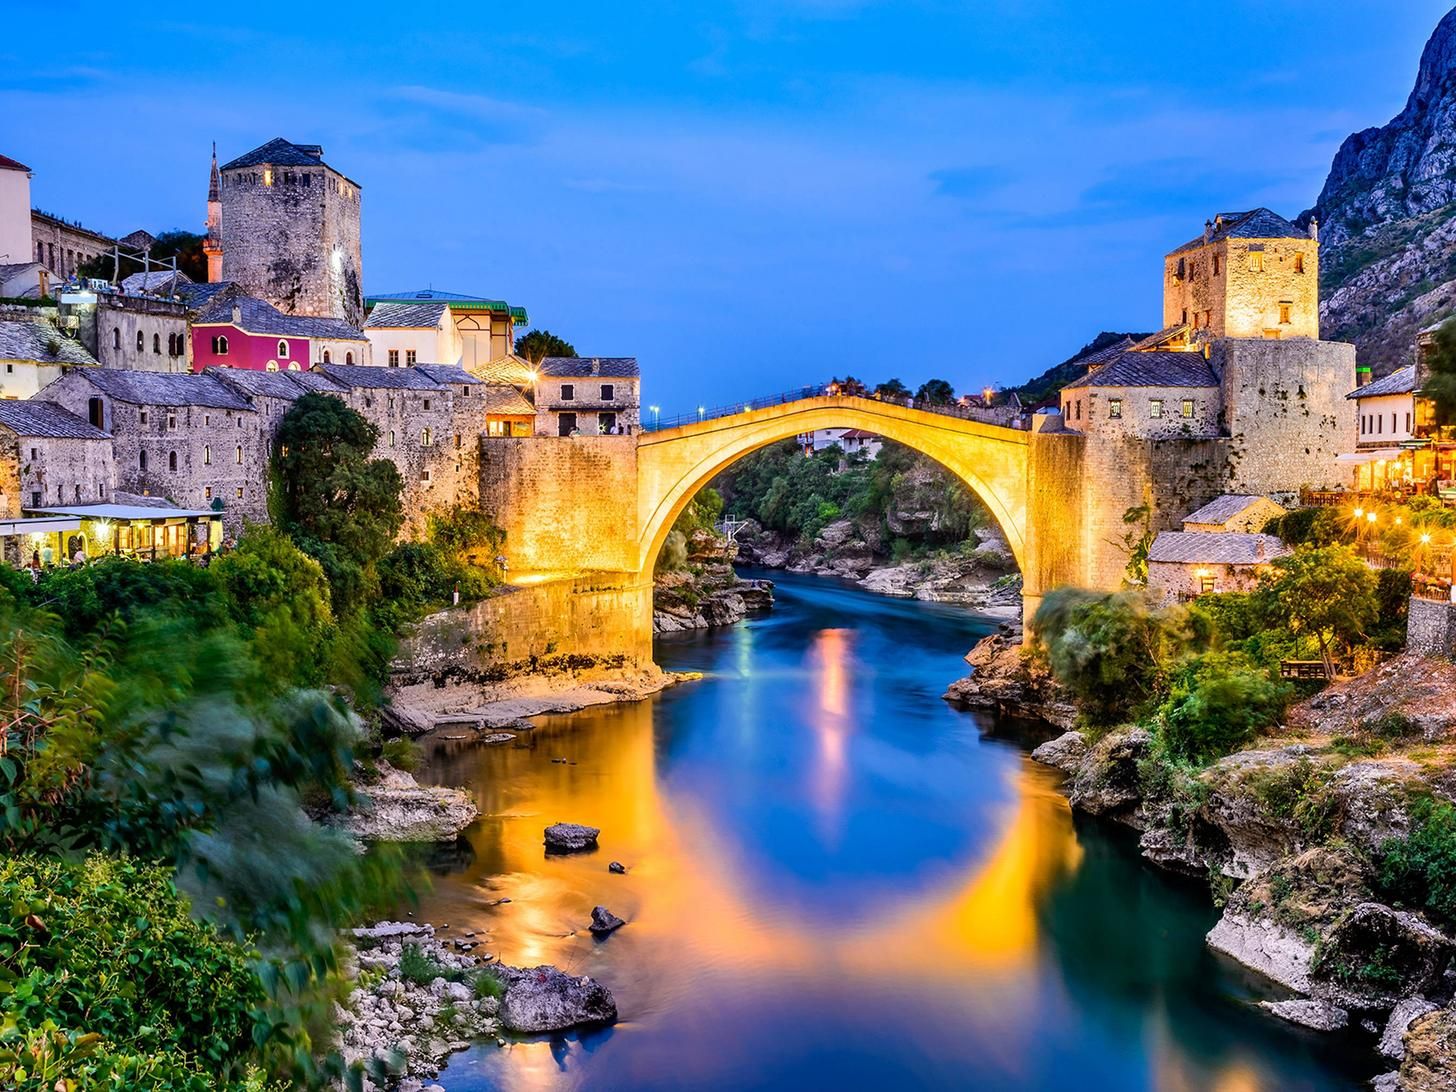 Here Are 24 Glorious Natural Attractions – Can You Match Them to Their Country? Bosnia and Herzegovina